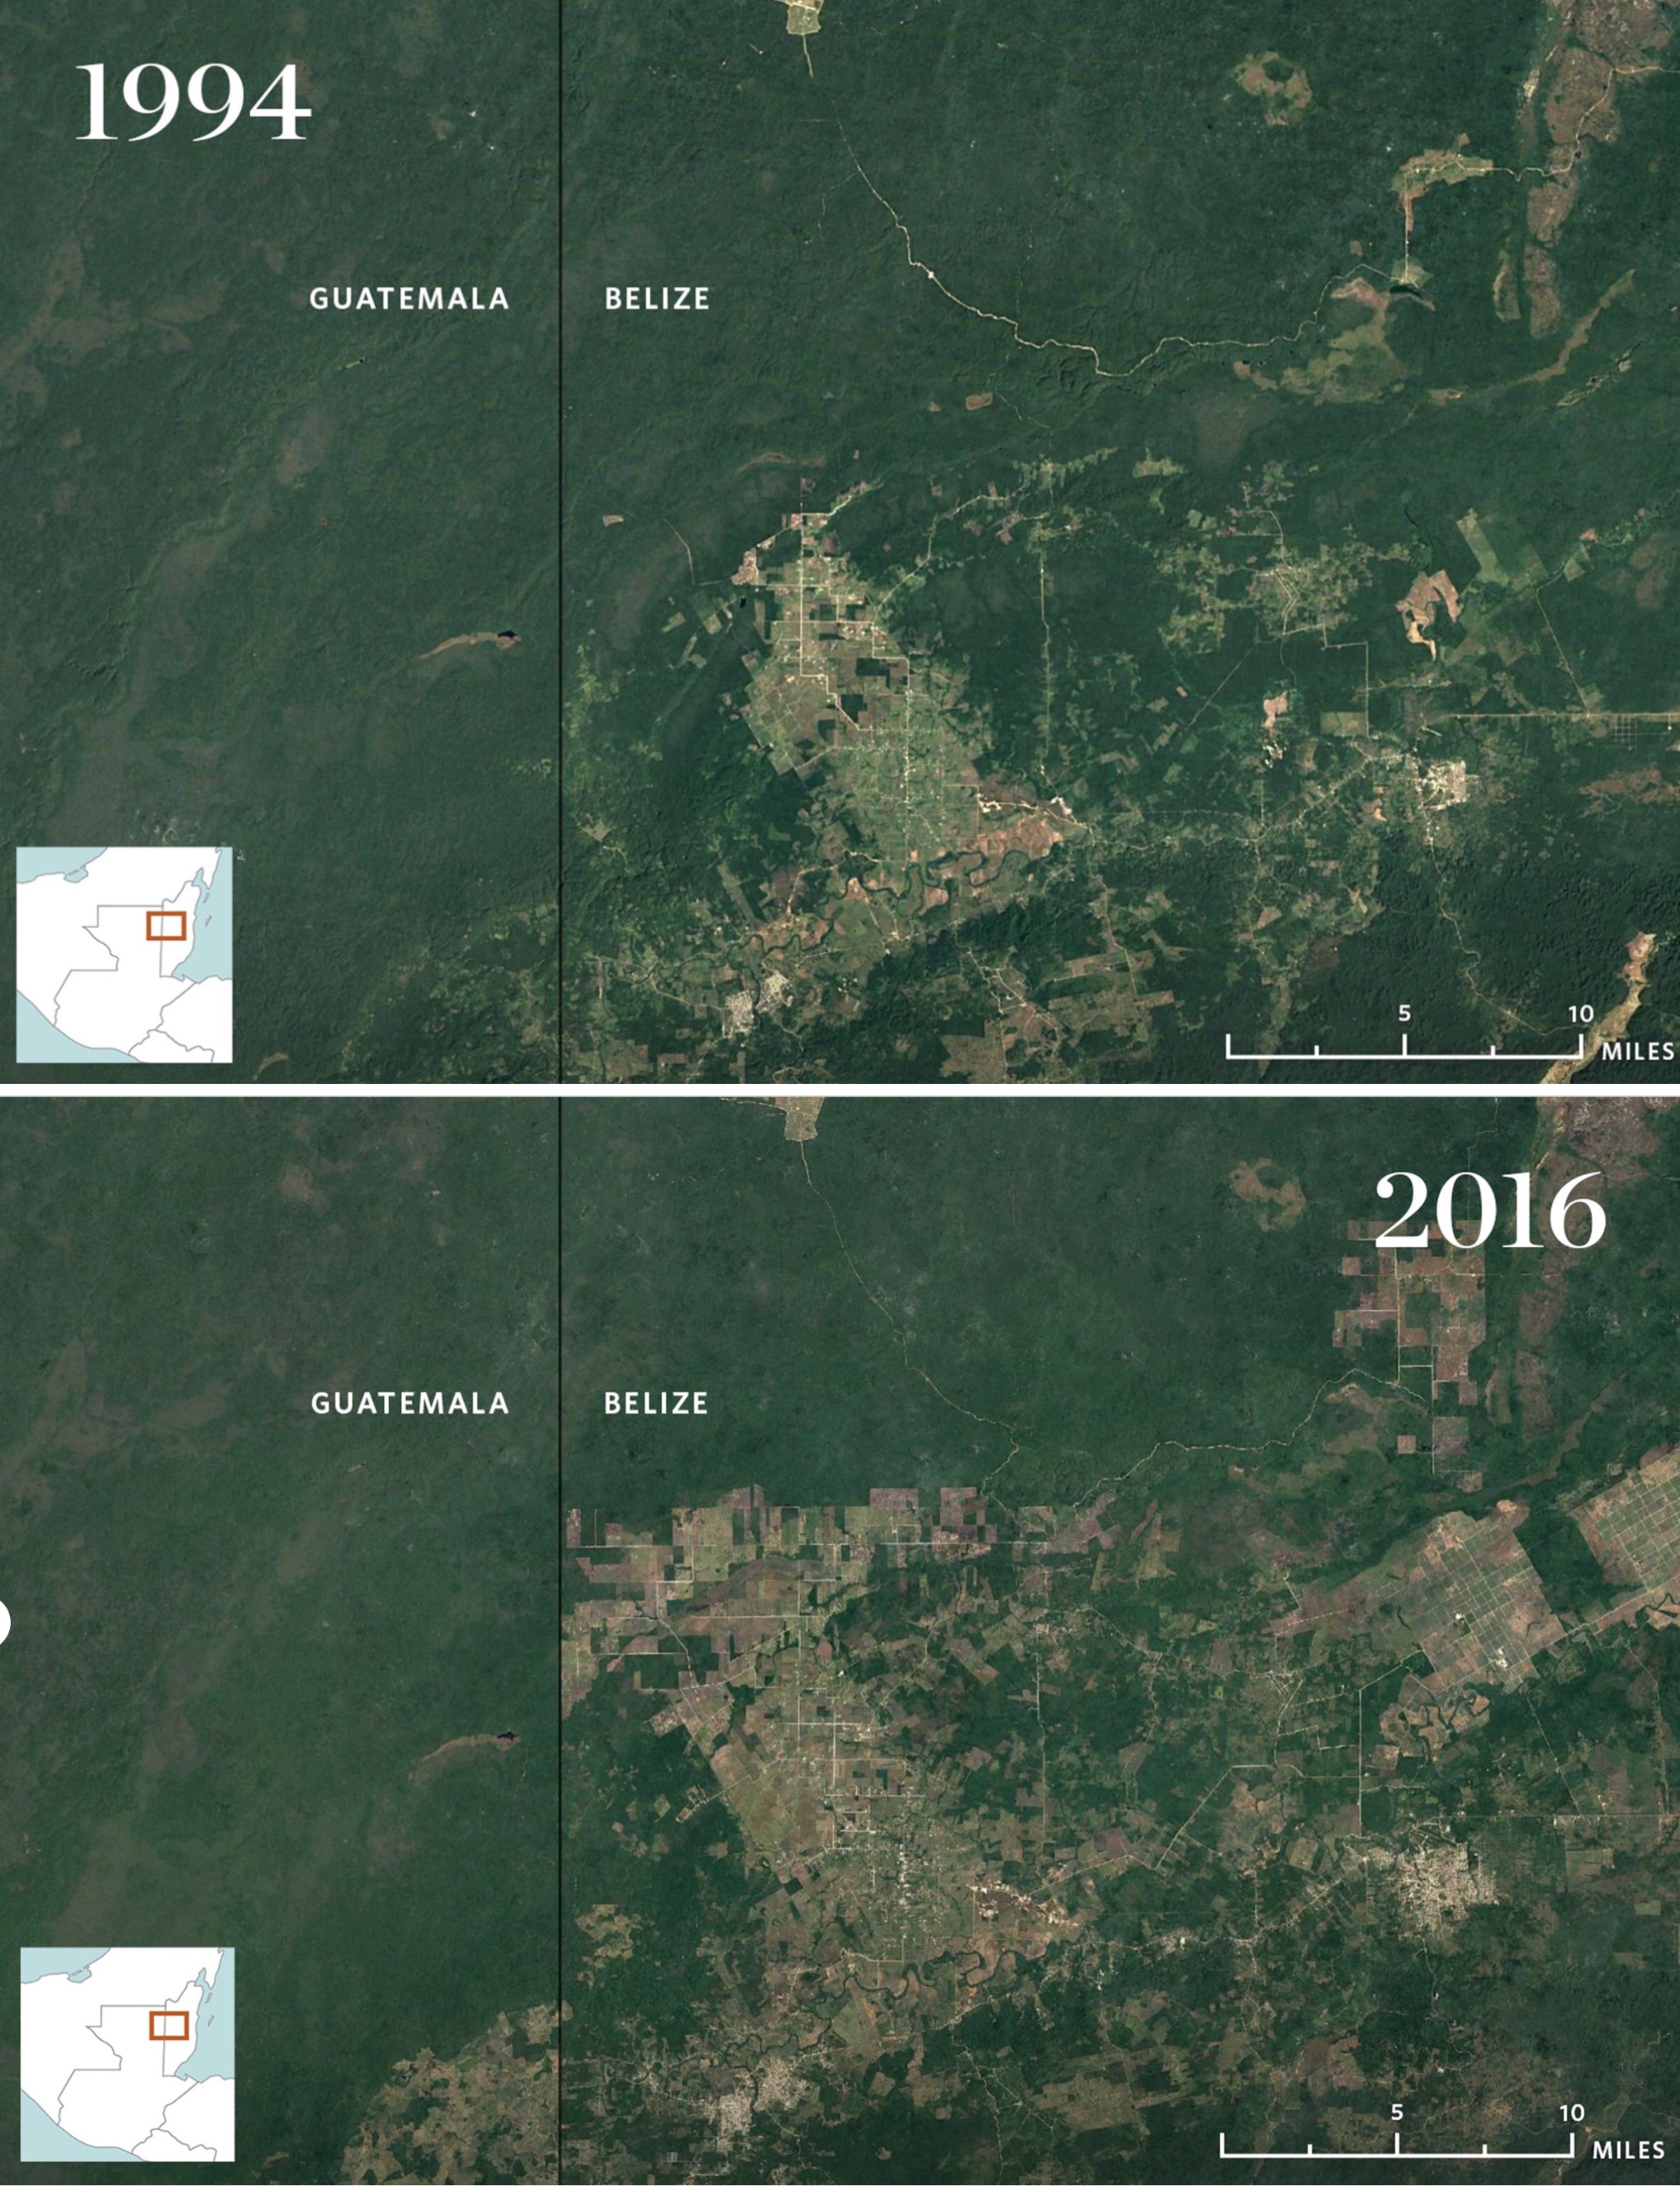 Around the Selva Maya, deforestation rates outpace the national average nearly four times over. Use the slider to see an example of how development has encroached on the forest along the western border of Belize from 1994 (left) to 2016 (right). © Google Earth, Image Landsat/Copernicus